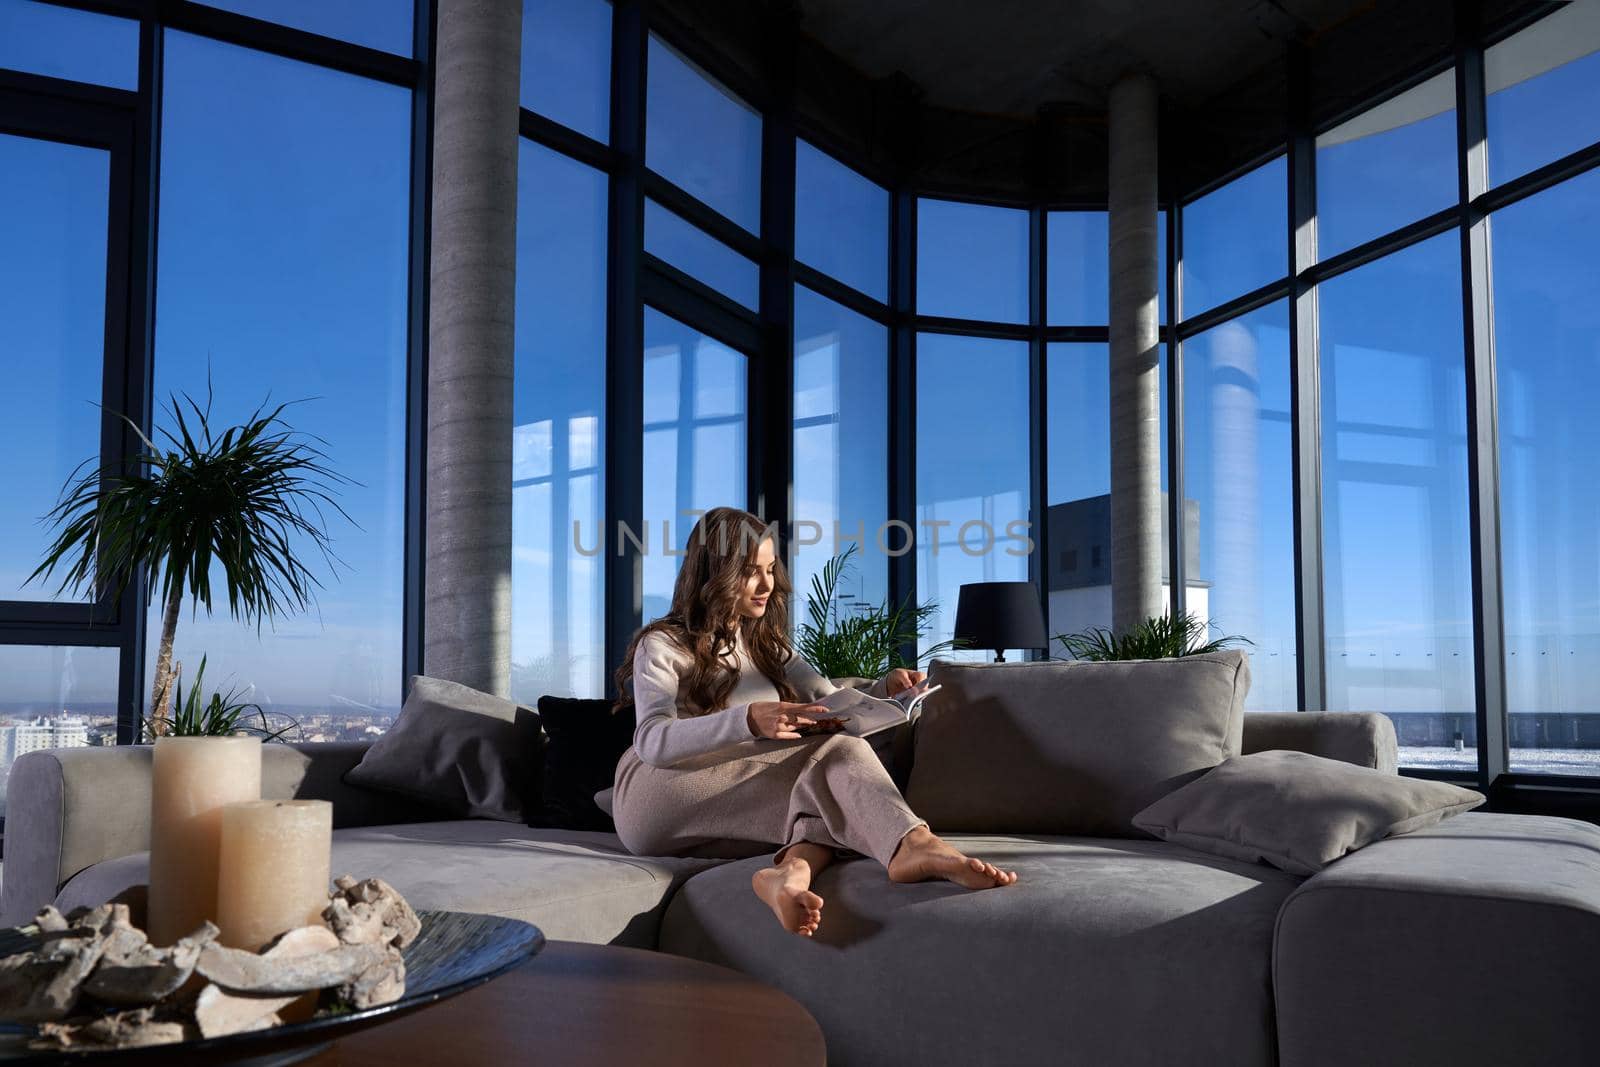 Front view of young brunette woman sitting on cozy grey sofa reading book near large panoramic window with incredible view on city. Concept of relaxing at home or hotel with modern interior.